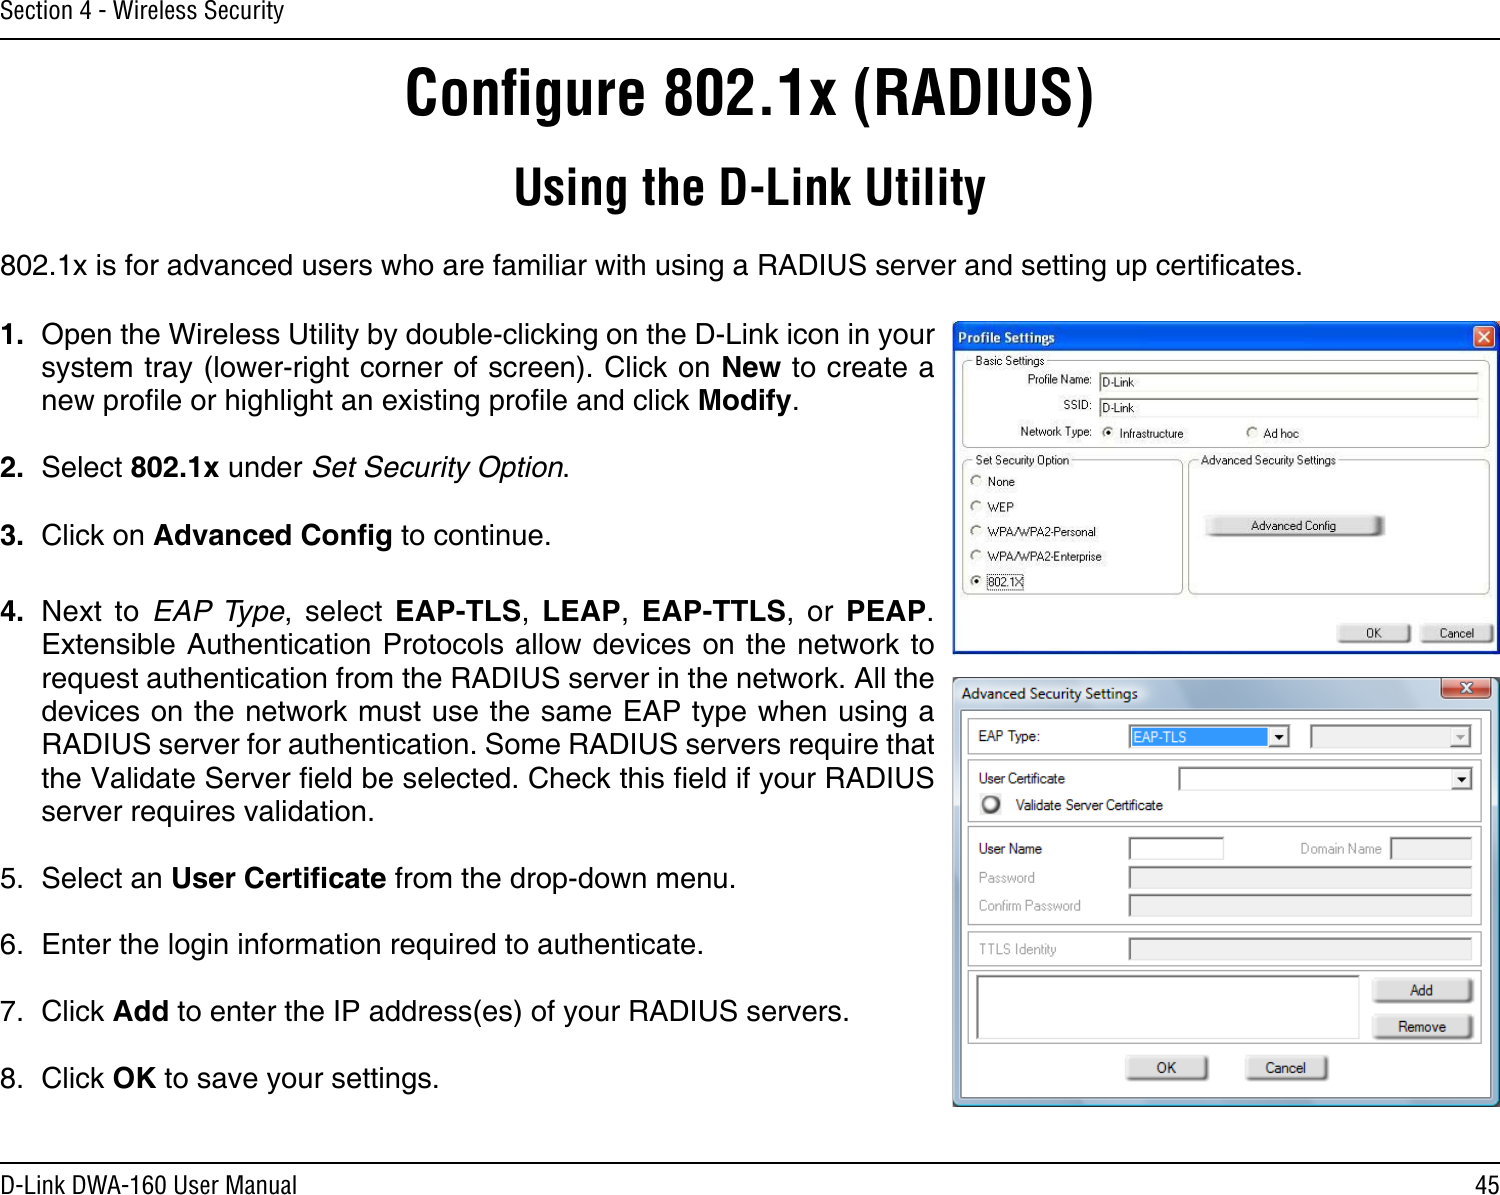 45D-Link DWA-160 User ManualSection 4 - Wireless SecurityConﬁgure 802.1x (RADIUS)Using the D-Link Utility802.1x is for advanced users who are familiar with using a RADIUS server and setting up certicates.1.  Open the Wireless Utility by double-clicking on the D-Link icon in your system tray (lower-right corner of screen). Click on New to create a new prole or highlight an existing prole and click Modify. 2.  Select 802.1x under Set Security Option.3.  Click on Advanced Cong to continue.4.  Next  to  EAP Type,  select  EAP-TLS,  LEAP,  EAP-TTLS,  or  PEAP. Extensible Authentication Protocols allow devices on the network to request authentication from the RADIUS server in the network. All the devices on the network must use the same EAP type when using a RADIUS server for authentication. Some RADIUS servers require that the Validate Server eld be selected. Check this eld if your RADIUS server requires validation.5.  Select an User Certicate from the drop-down menu.6.  Enter the login information required to authenticate.7.  Click Add to enter the IP address(es) of your RADIUS servers.8.  Click OK to save your settings.